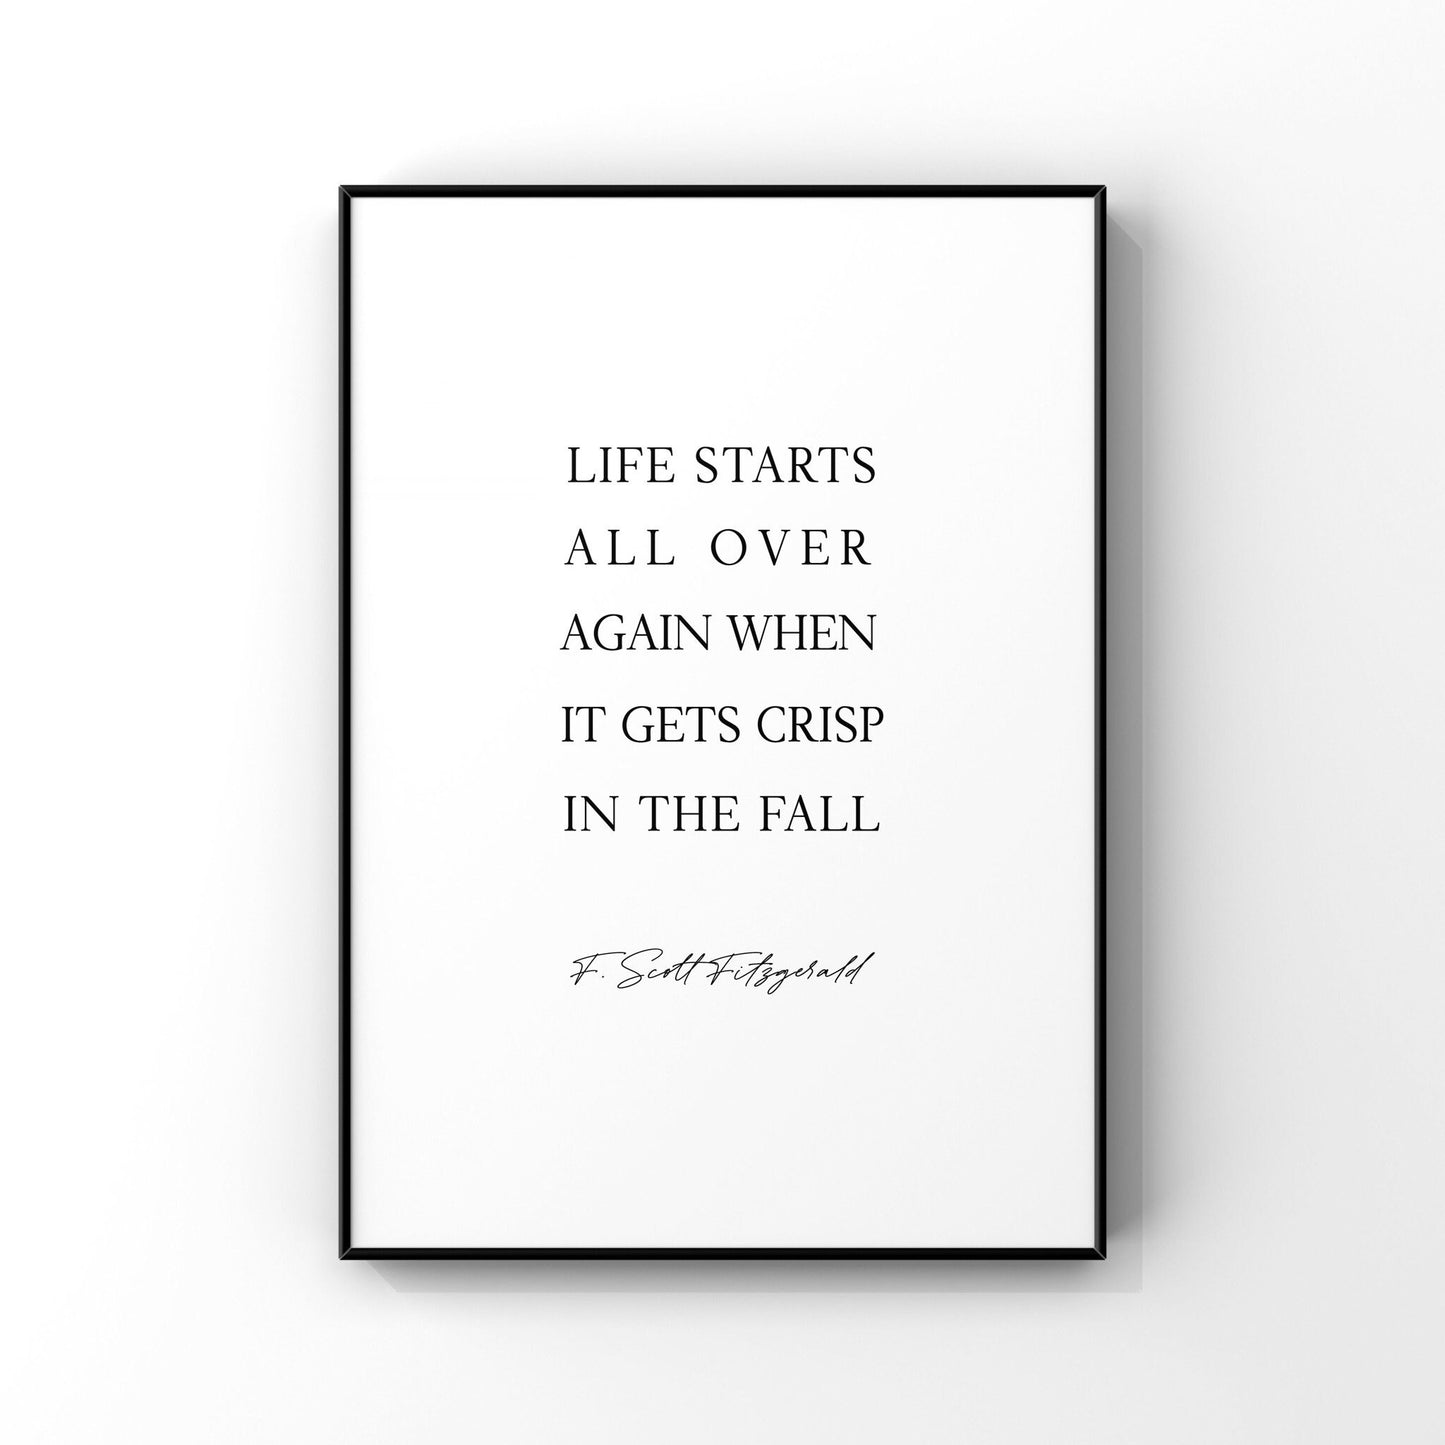 Life starts all over again when it gets crisp in the fall, F. Scott Fitzgerald quote art, Fall print, Fall Wall Art, Fall Home Decor